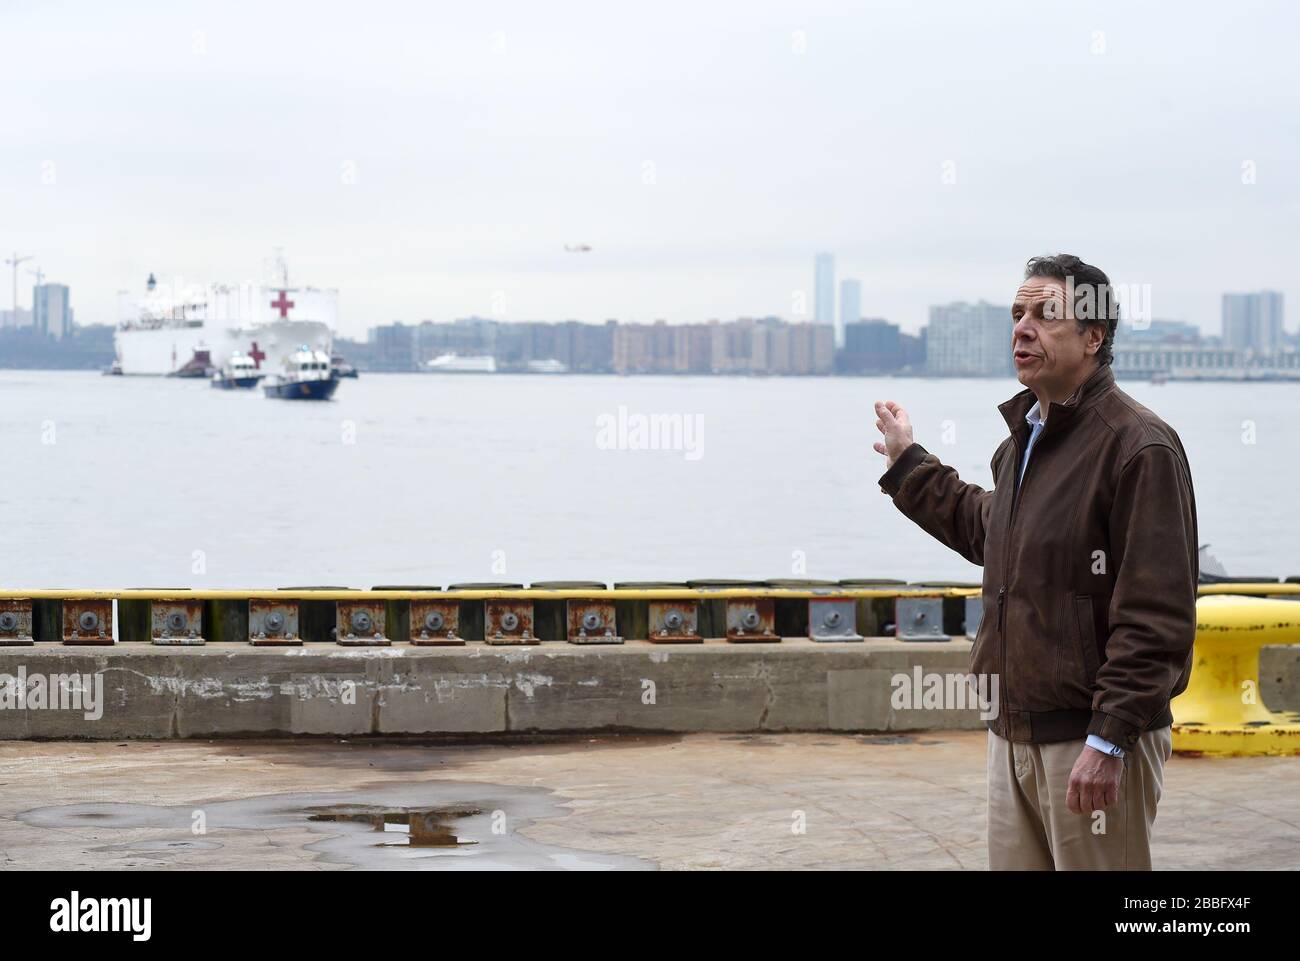 New York, NY, USA. März 2020. Andrew M. Cuomo Out and About for Andrew Cuomo Welcomes The USNS Comfort, AS IT Passes Pier 88 on the Hudson River, Pier 88, New York, NY 30. März 2020. Credit: Kristin Callahan/Everett Collection/Alamy Live News Stockfoto